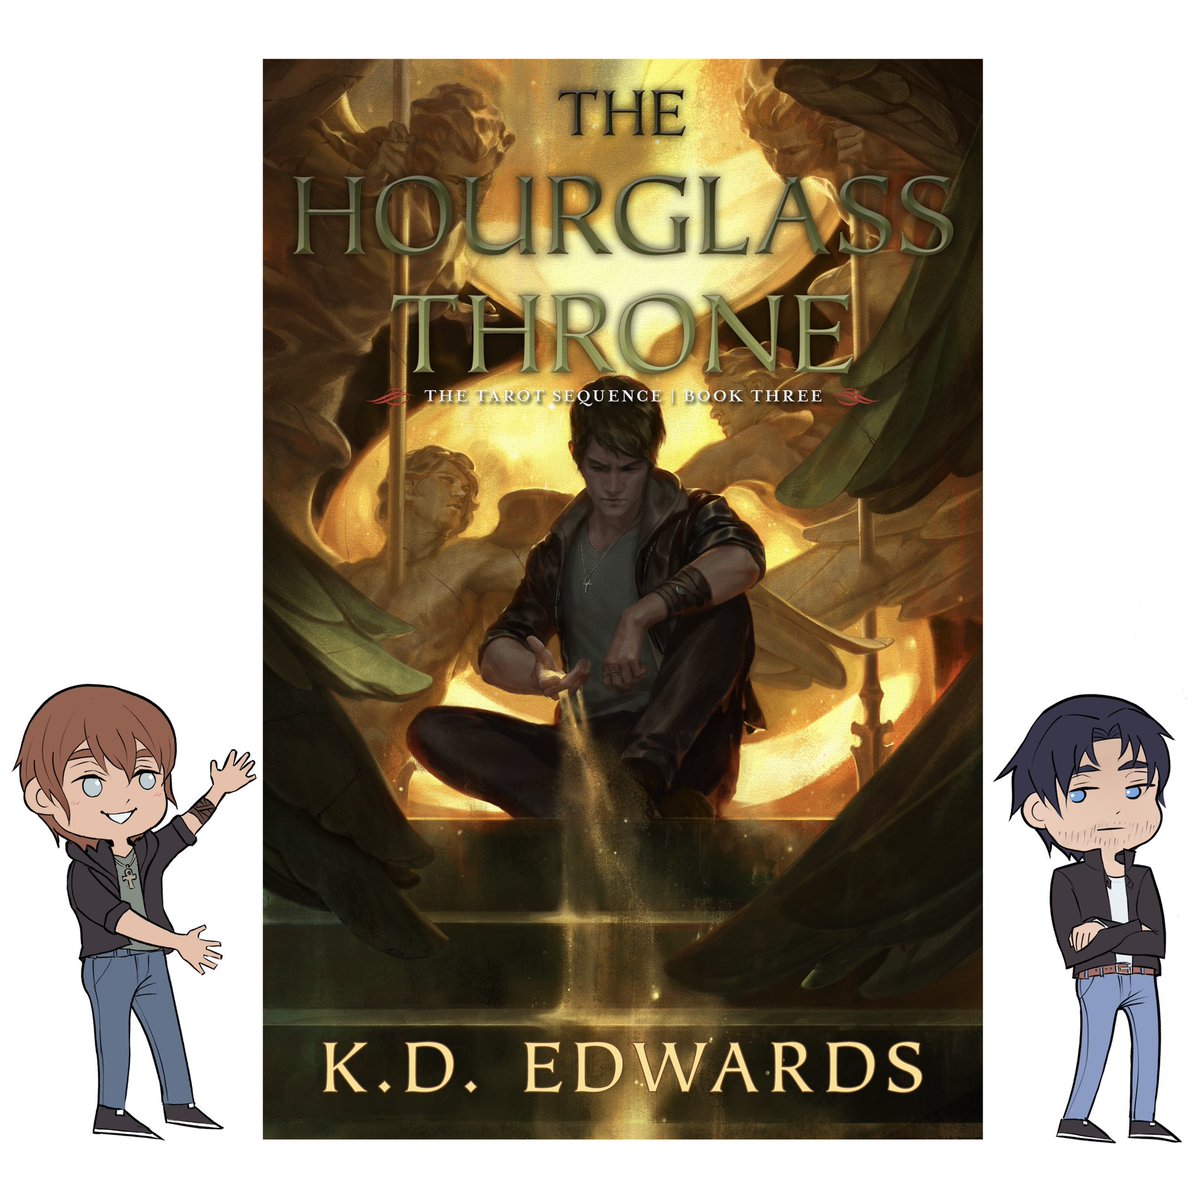 Introducing this AMAZING cover for The Hourglass Throne by @KDEdwards_NC! Don't let Brand's expression fool you – he wouldn't miss this for the world! Cover art by the incredible @micahepsteinart!  #TheTarotSequence #TheHourglassThrone @Pyr_Books